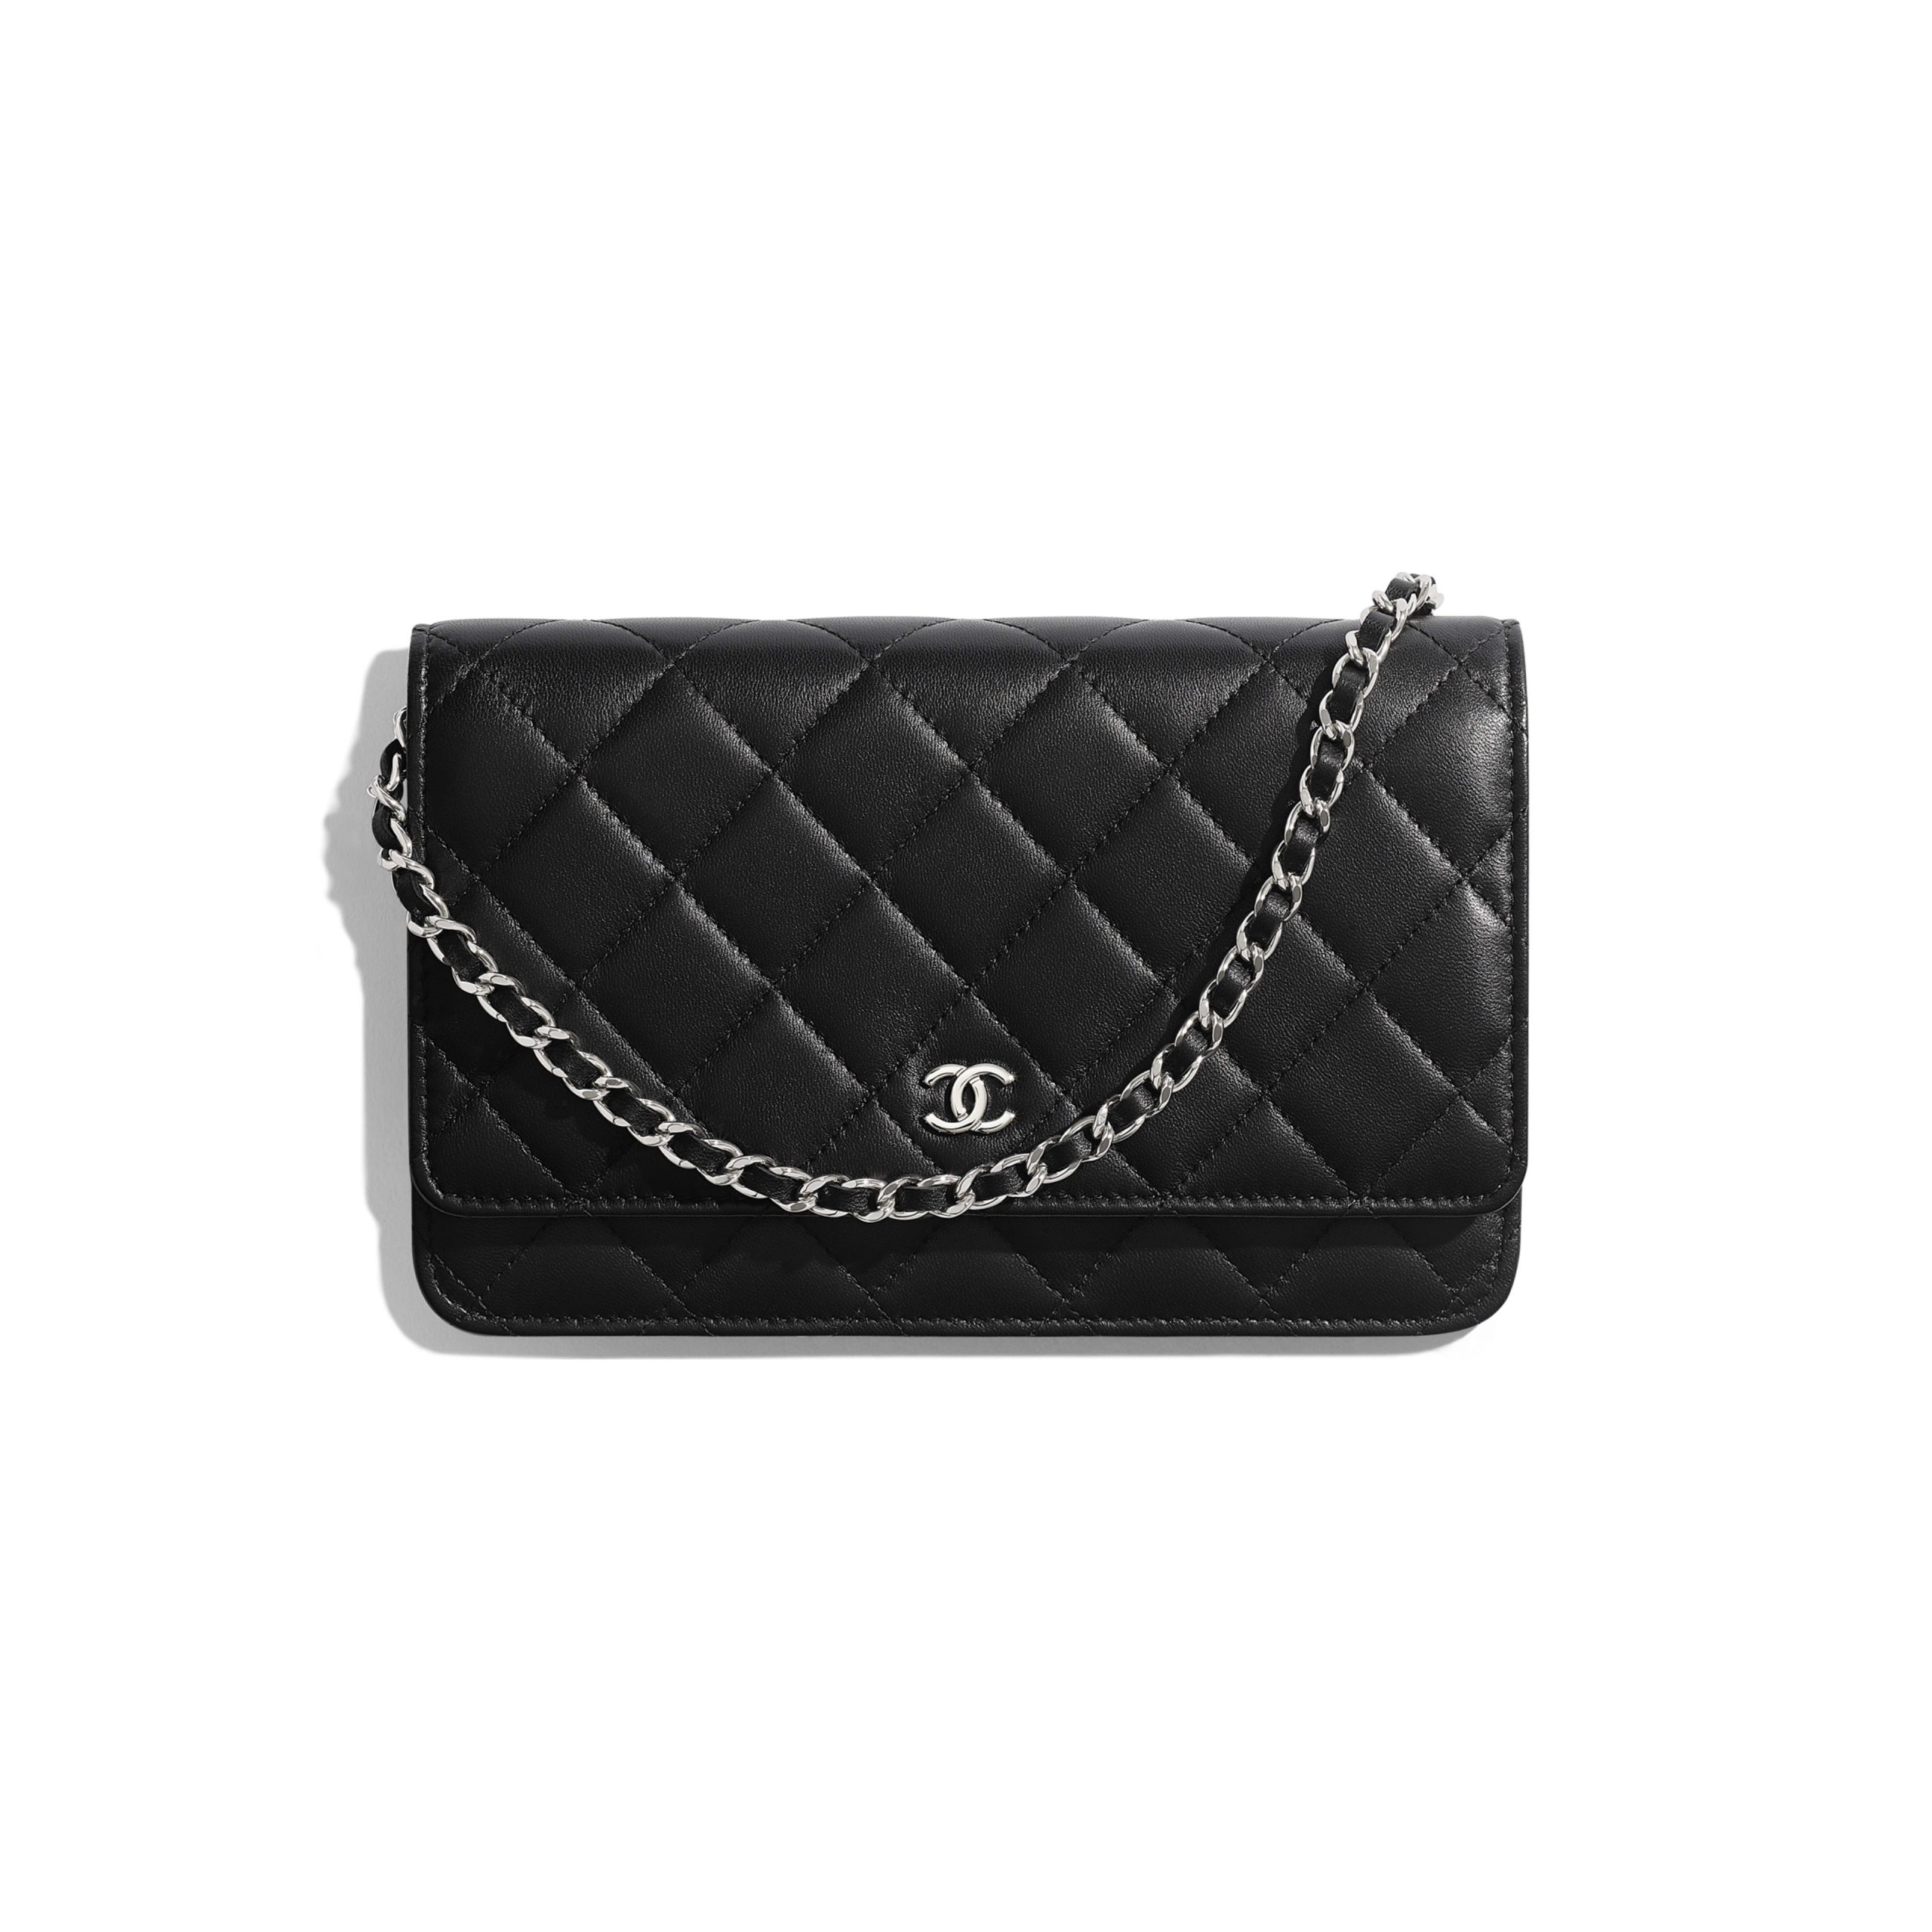 CHANEL Lambskin Quilted Chanel 19 Wallet On Chain WOC Black 531282 |  FASHIONPHILE